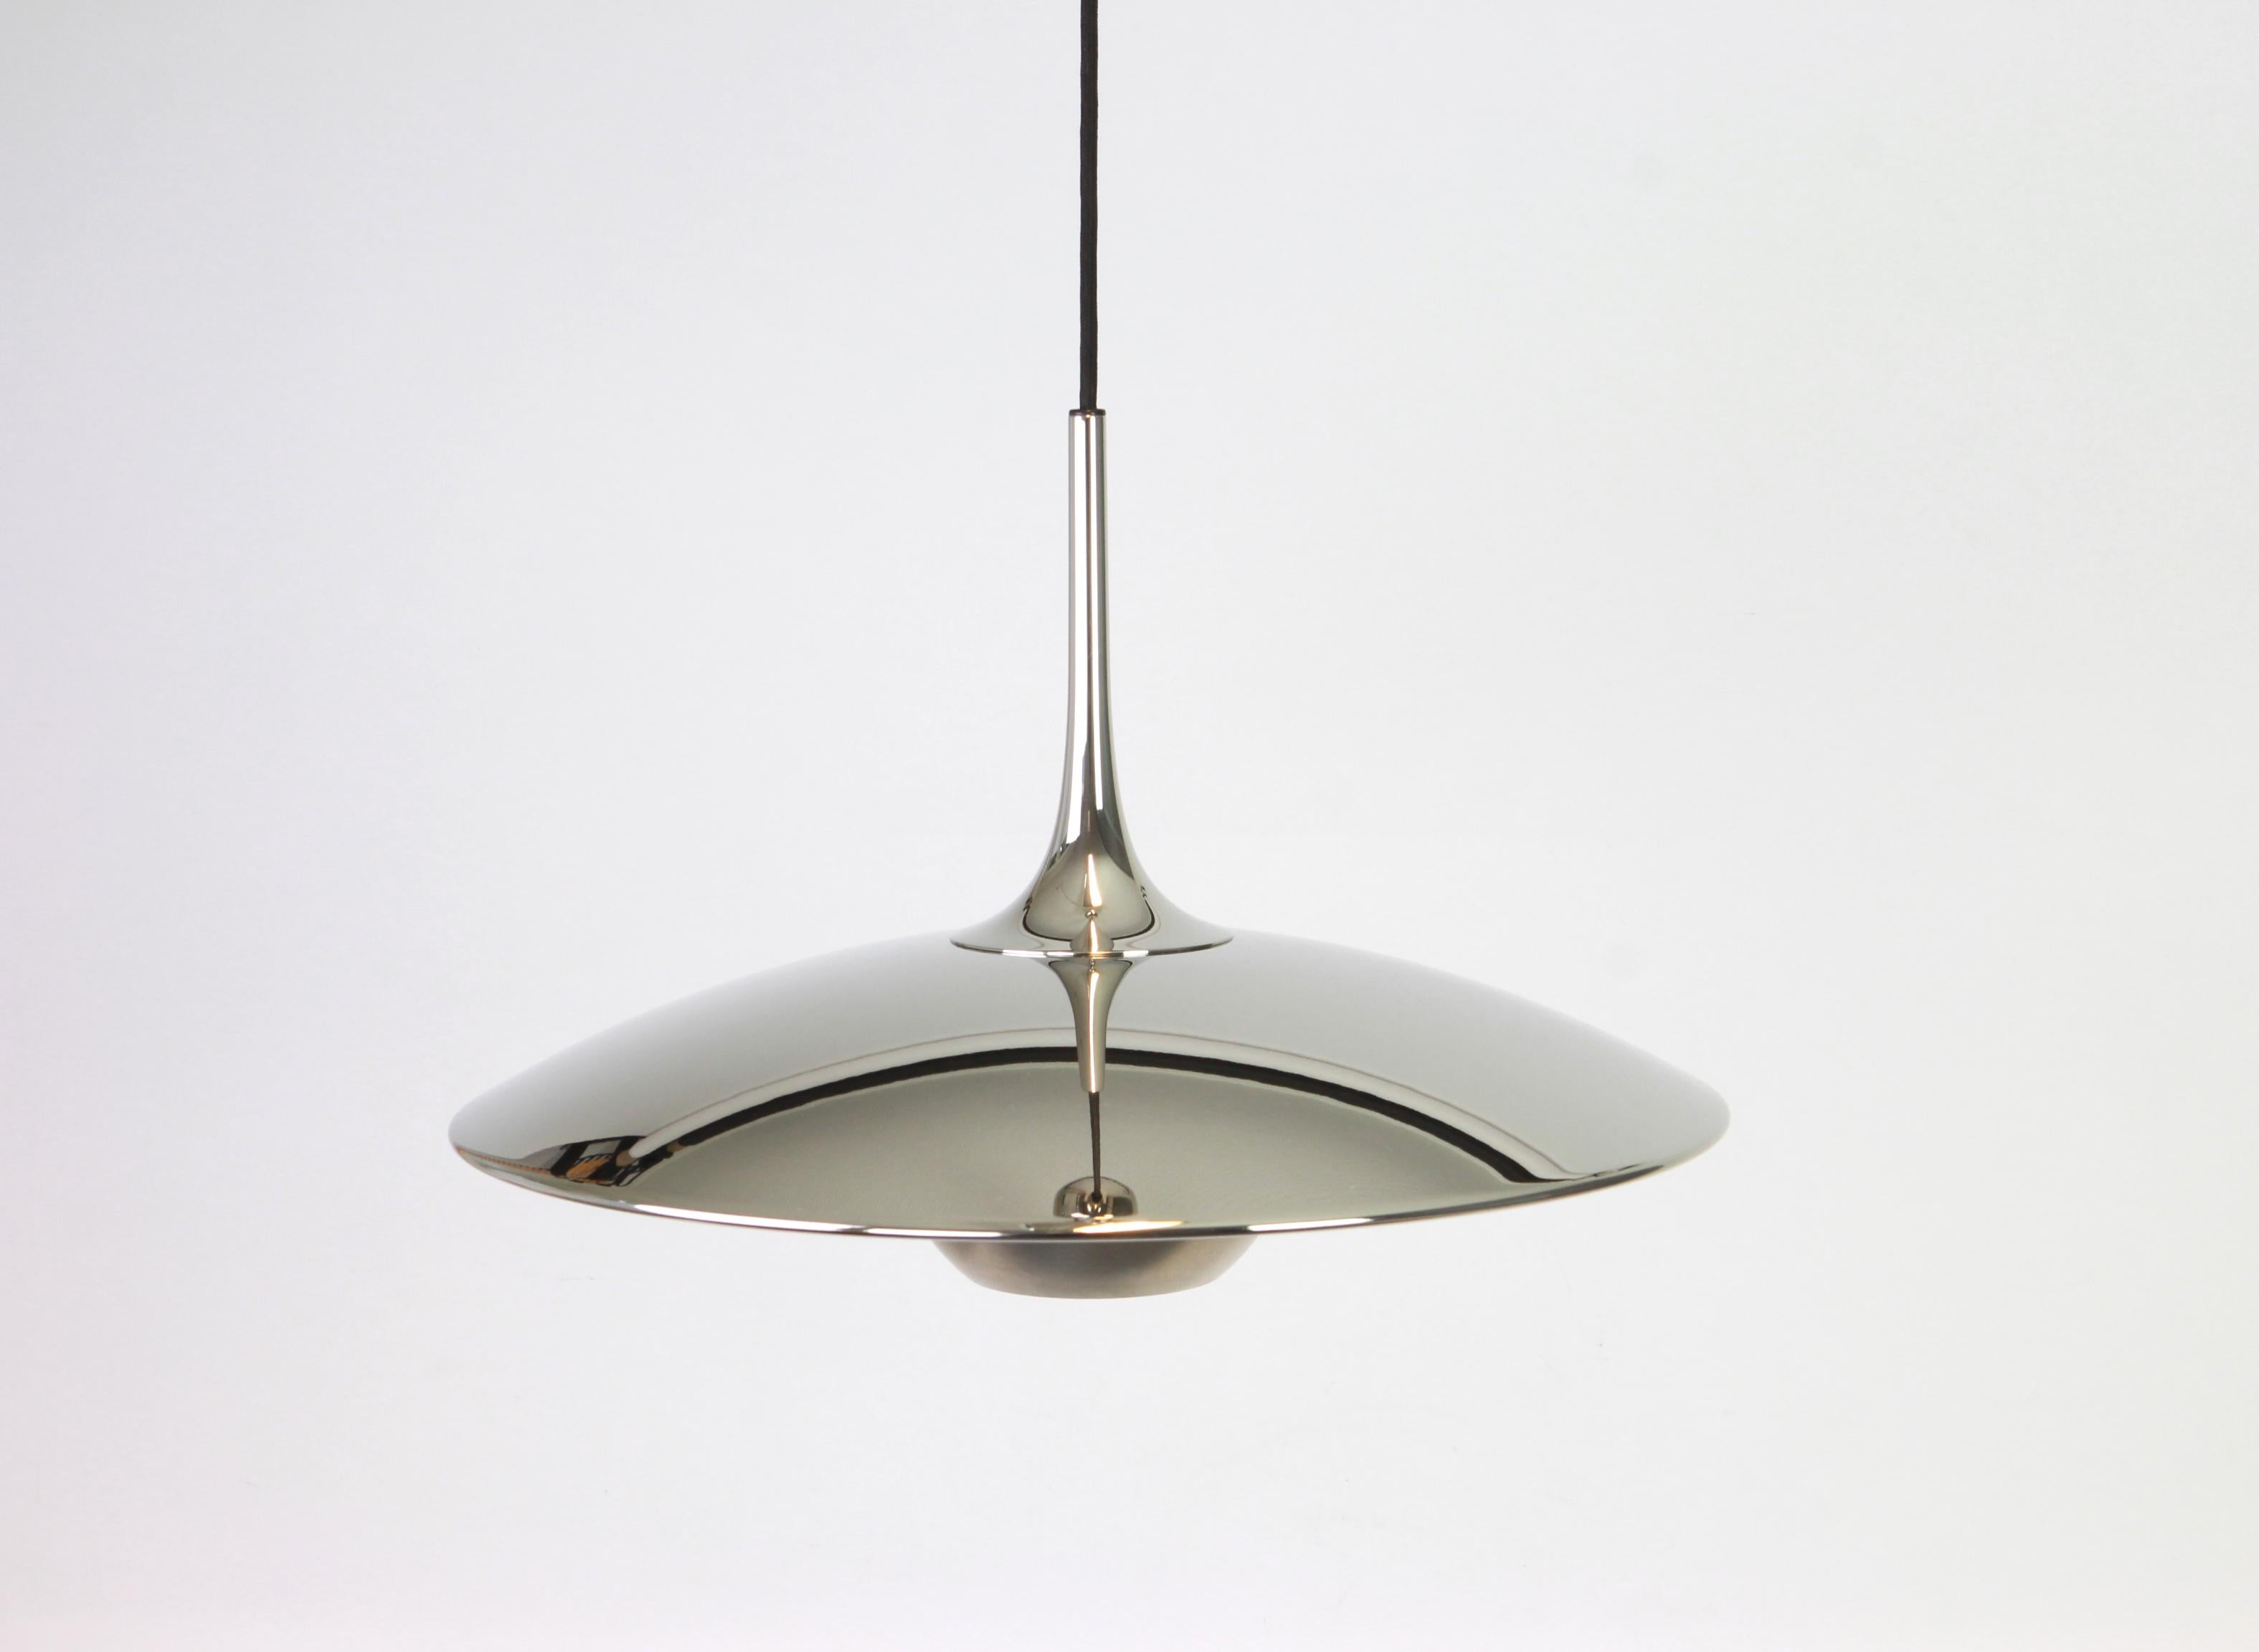 Large adjustable chrome counterweight pendant light designed by Florian Schulz, Germany, 1970s.
Socket: 1 x standard bulb - E27 - Up to 150 Watt - and compatible with the US/UK/ etc. standards.

Very good condition.
The listed height is variable